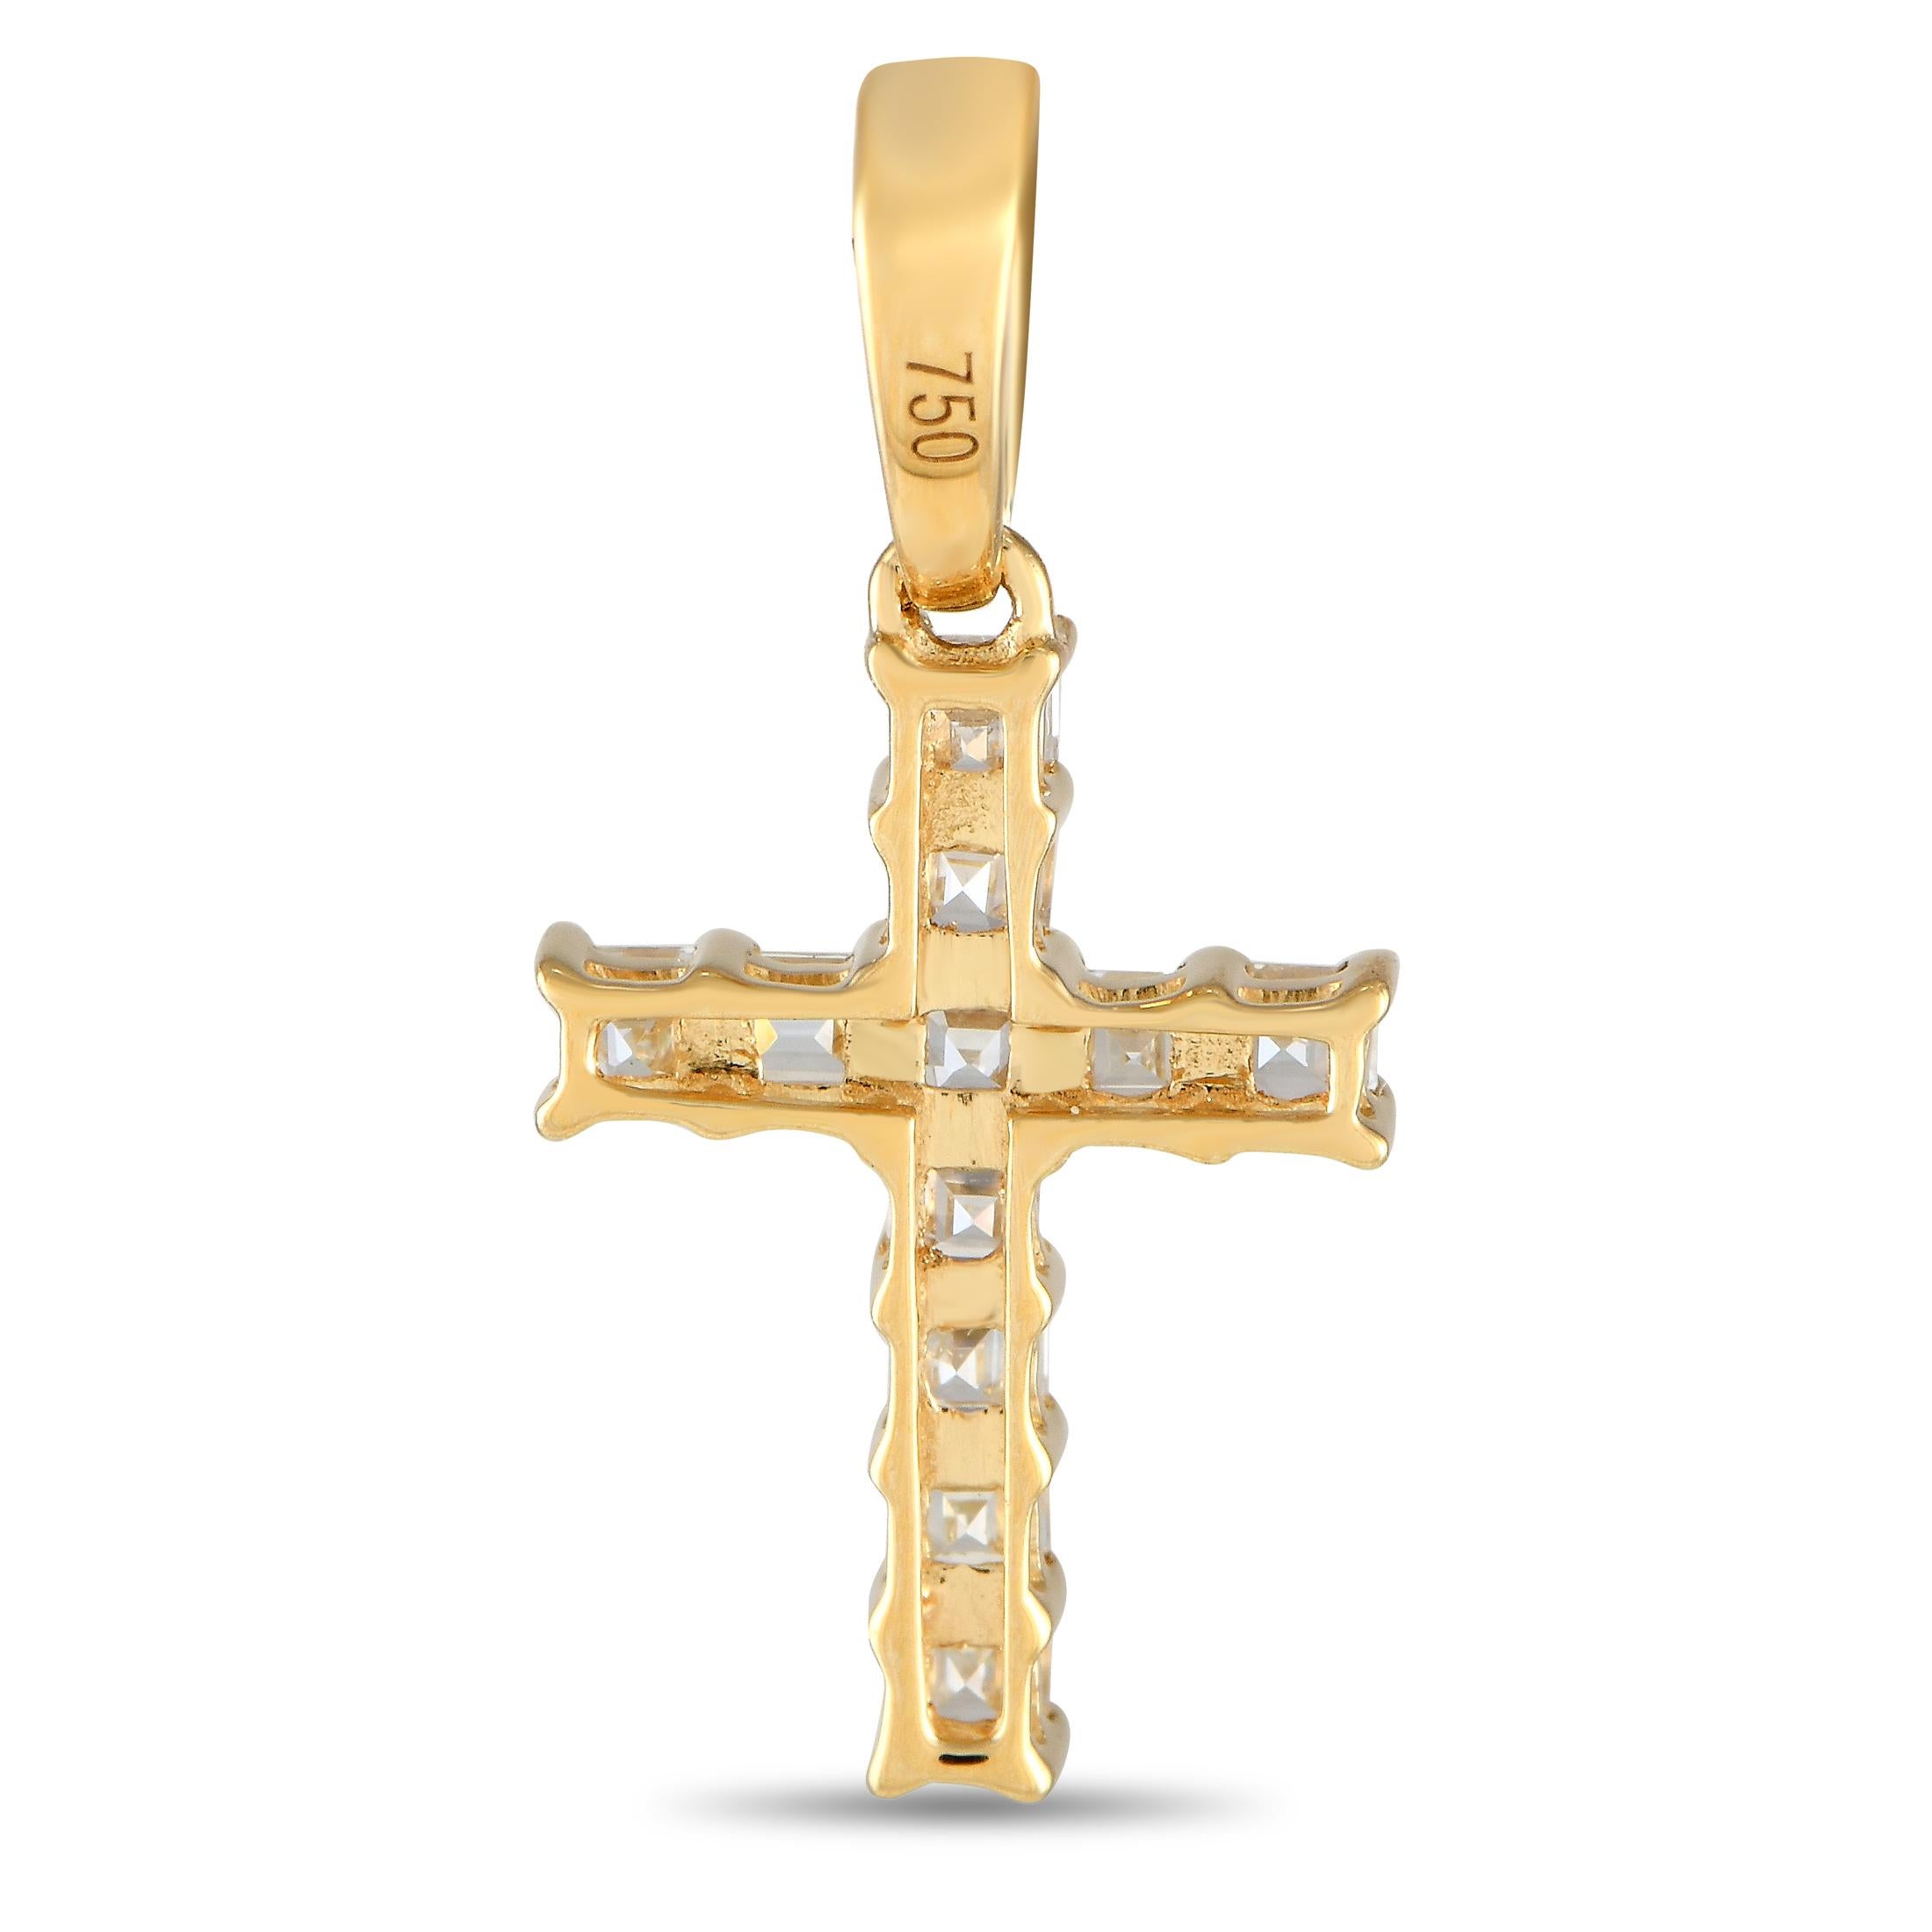 An array of sparkling Diamonds with a total weight 0.37 carats makes this cross shaped pendant simply unforgettable. Crafted from opulent 18K Yellow Gold, it measures 0.75 long by 0.45 wide.This jewelry piece is offered in brand new condition and